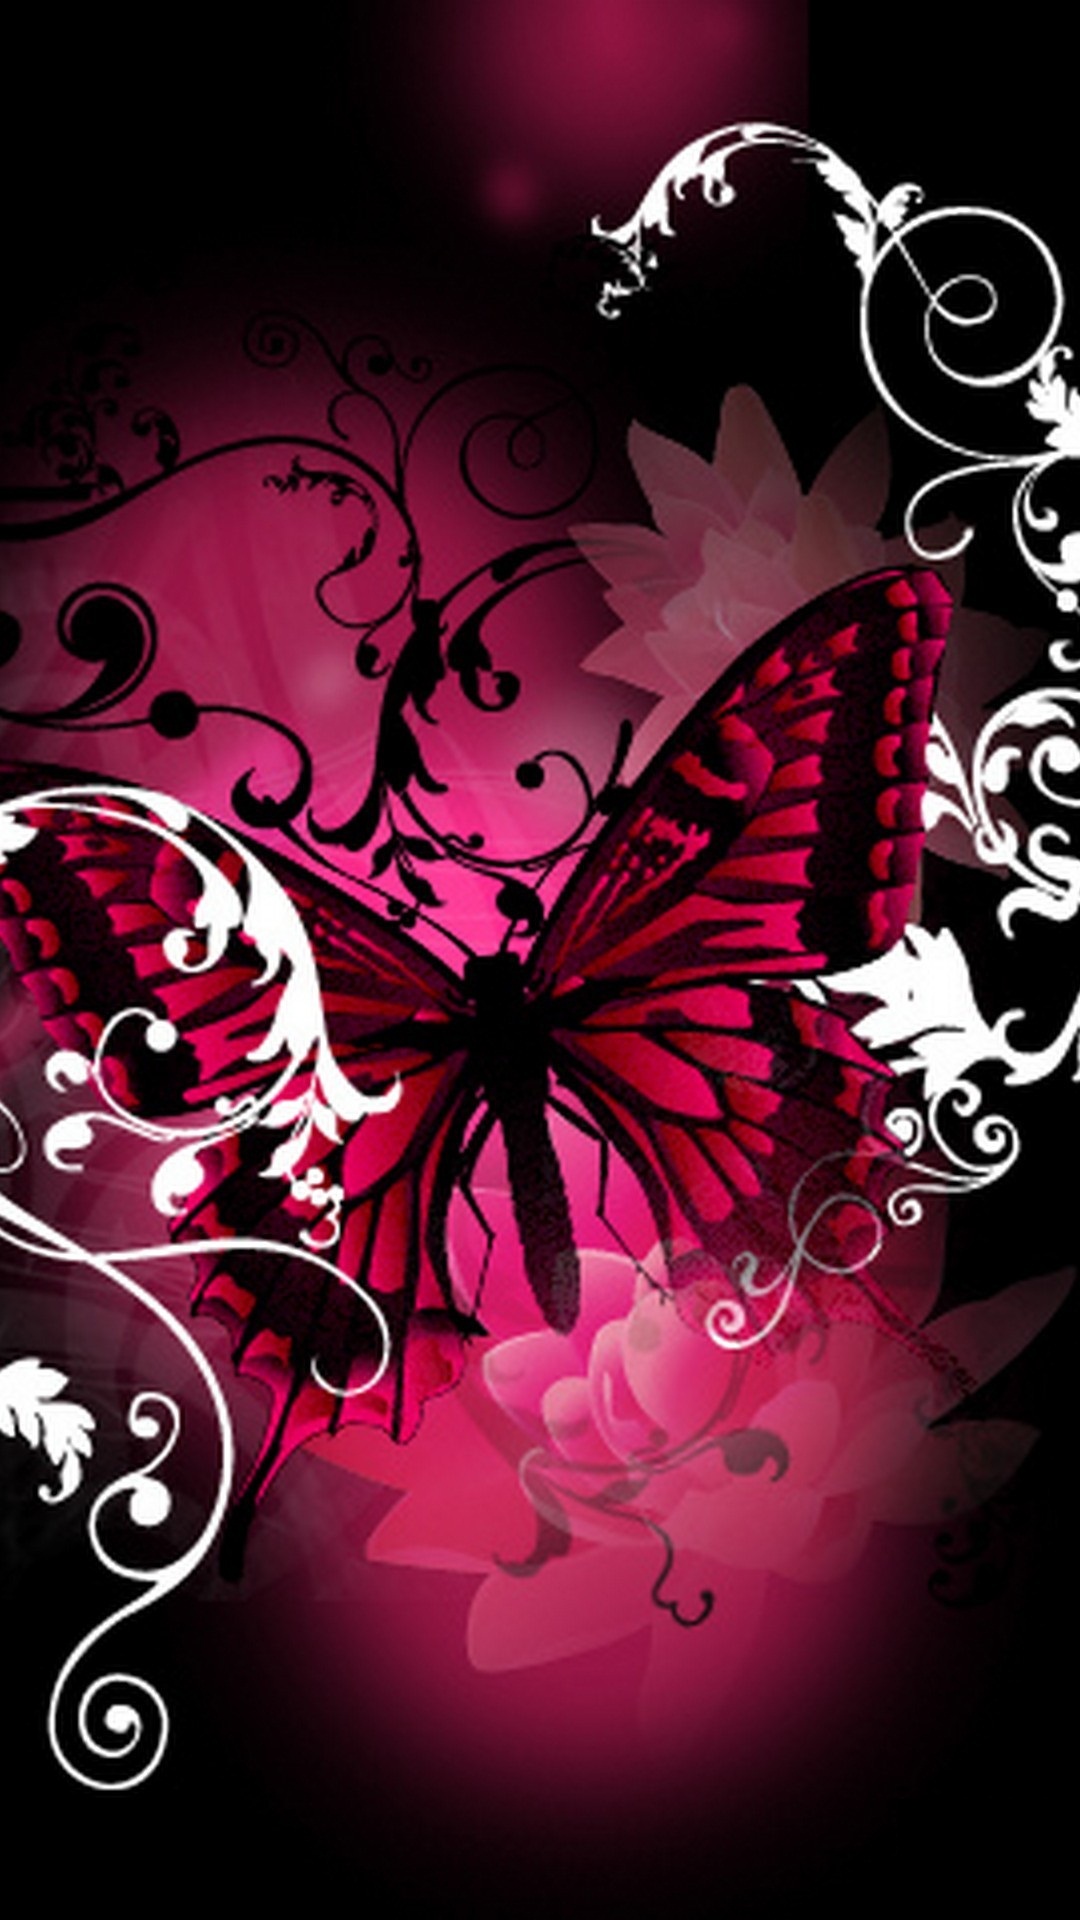 Pink Butterfly Android Wallpaper with HD resolution 1080x1920